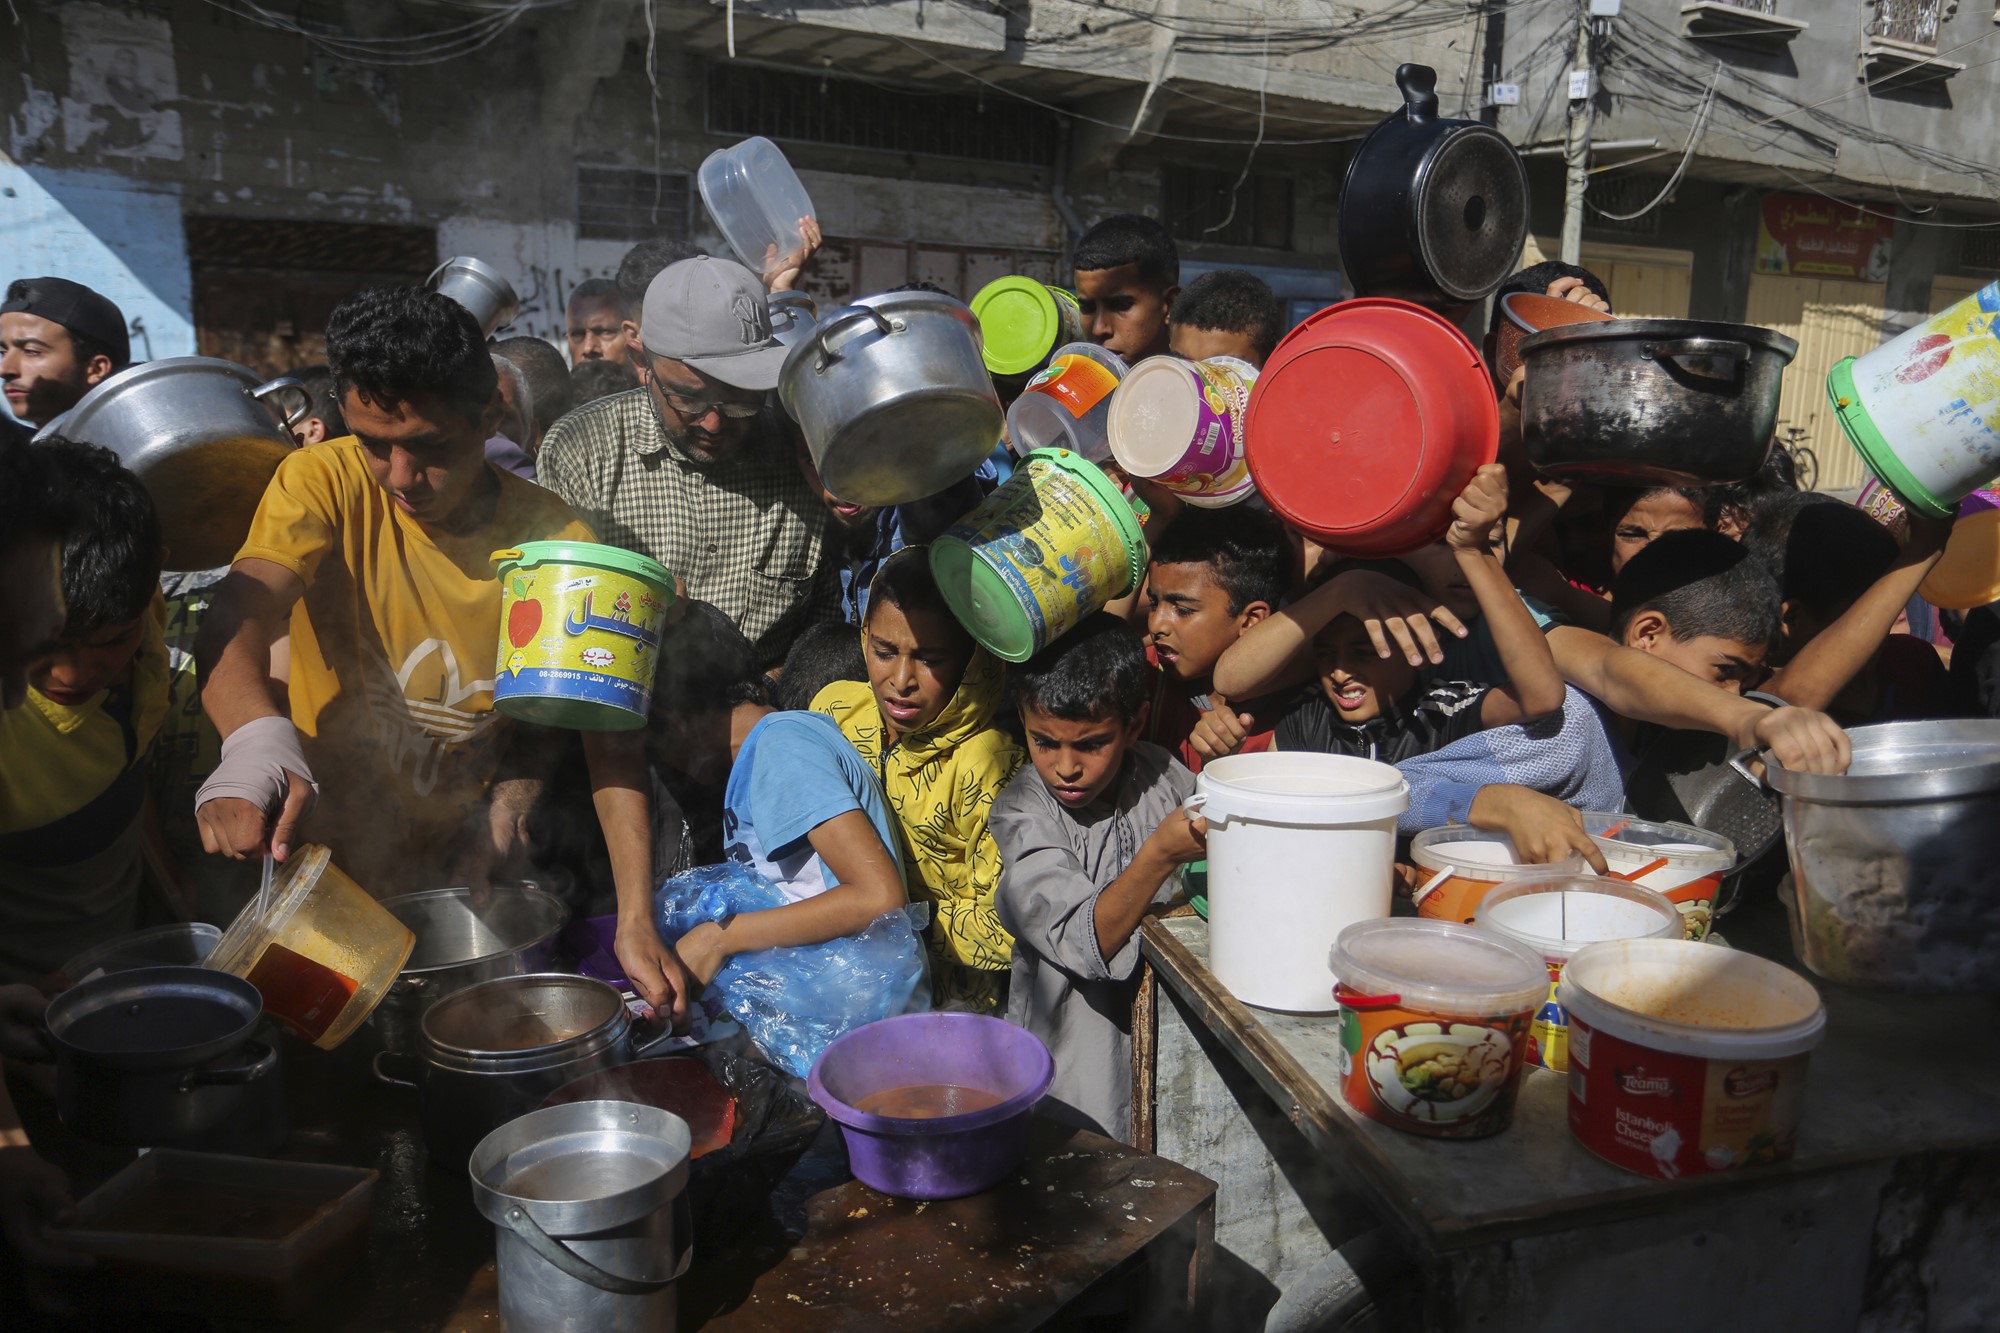 An image of people with pans and pots trying to get food from a distributor in Rafah, Gaza.